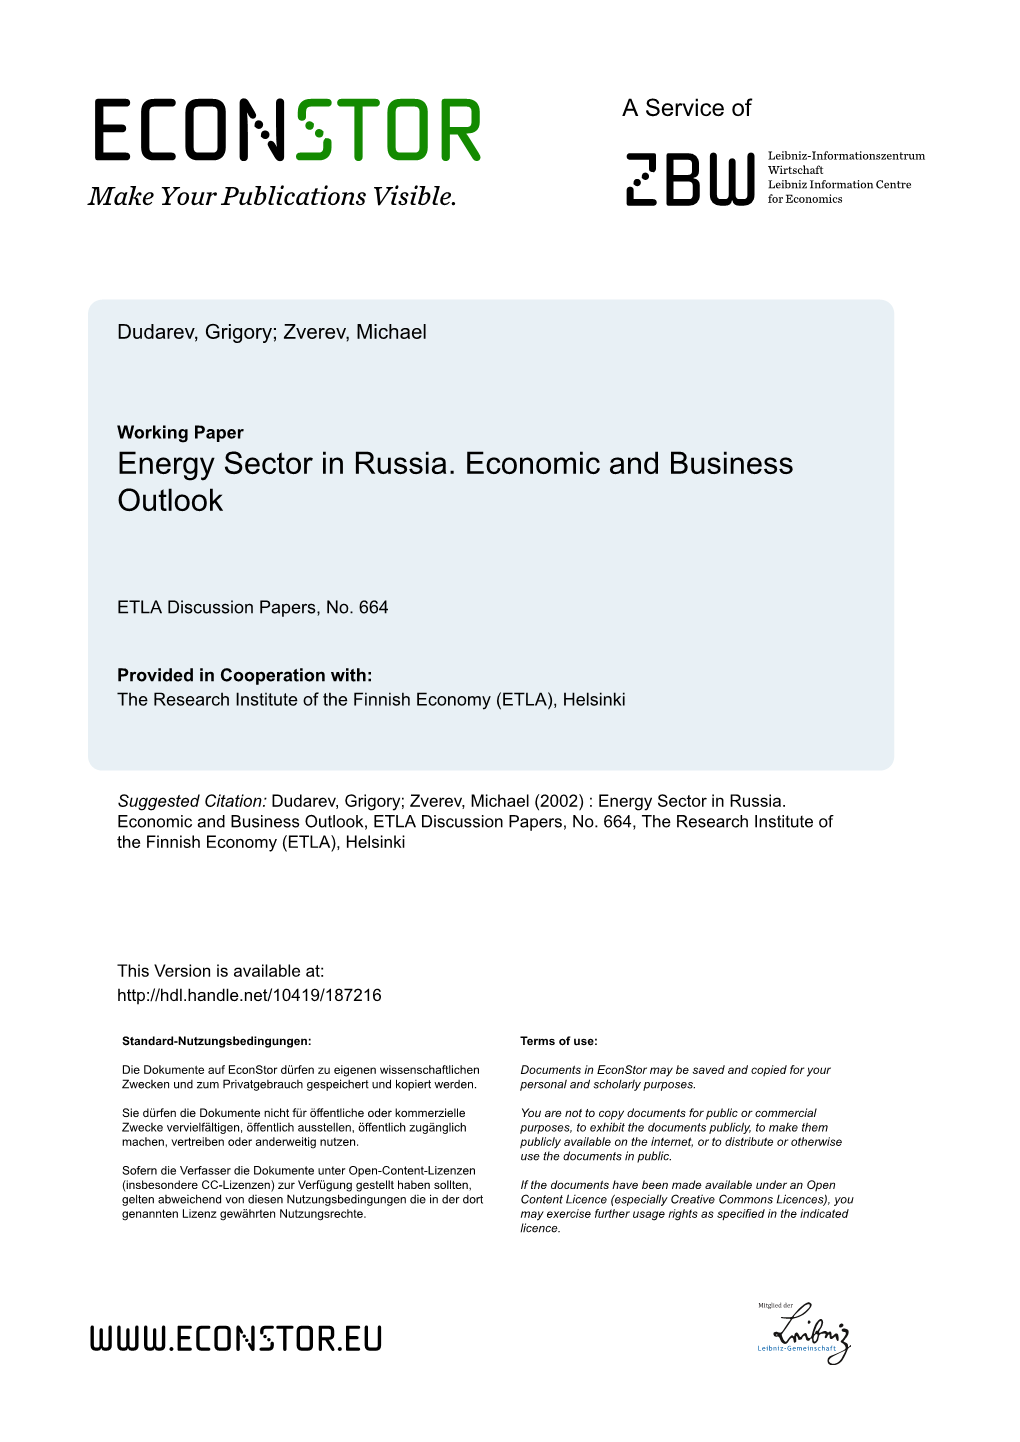 Energy Sector in Russia. Economic and Business Outlook